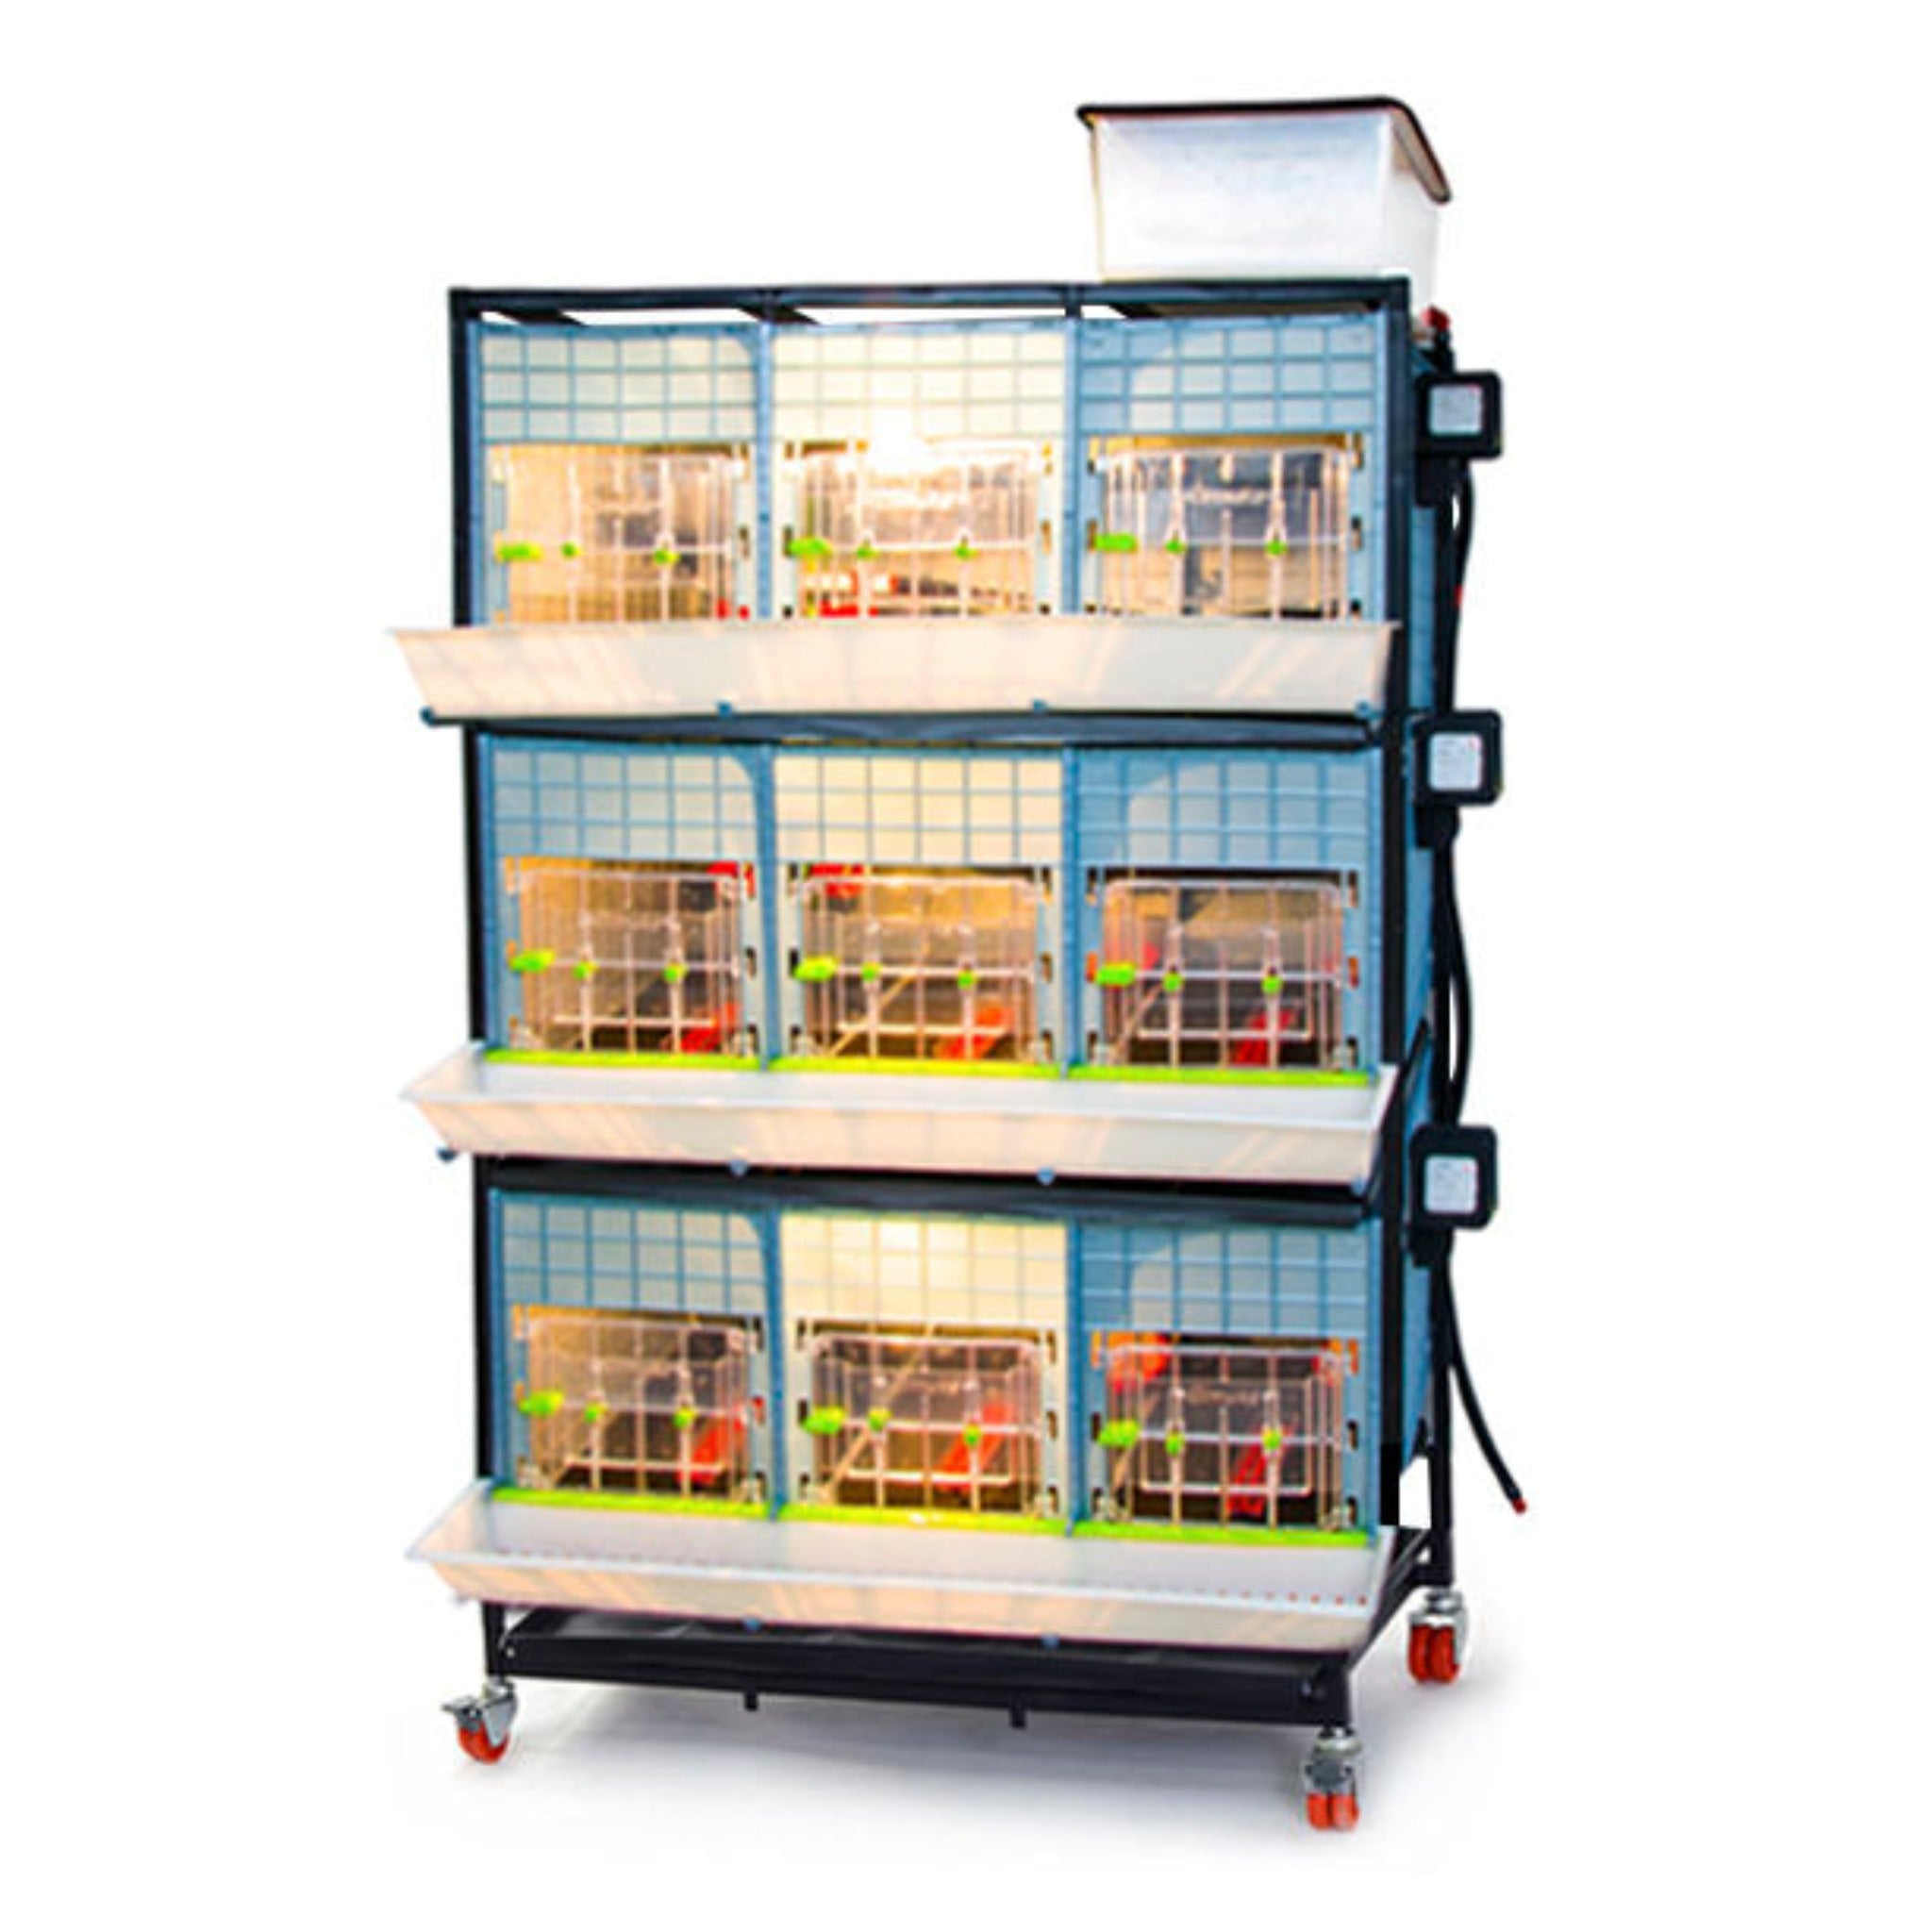 Hatching Time Cimuka 3 Layer 15 Inch Brooder front visible with LED light on. Feeding trough is located on front of brooders. Clear plastic doors with locks can be seen. Heater thermostat visible on side of brooders. Brooders are on Metal frame with rolling casters for mobility.